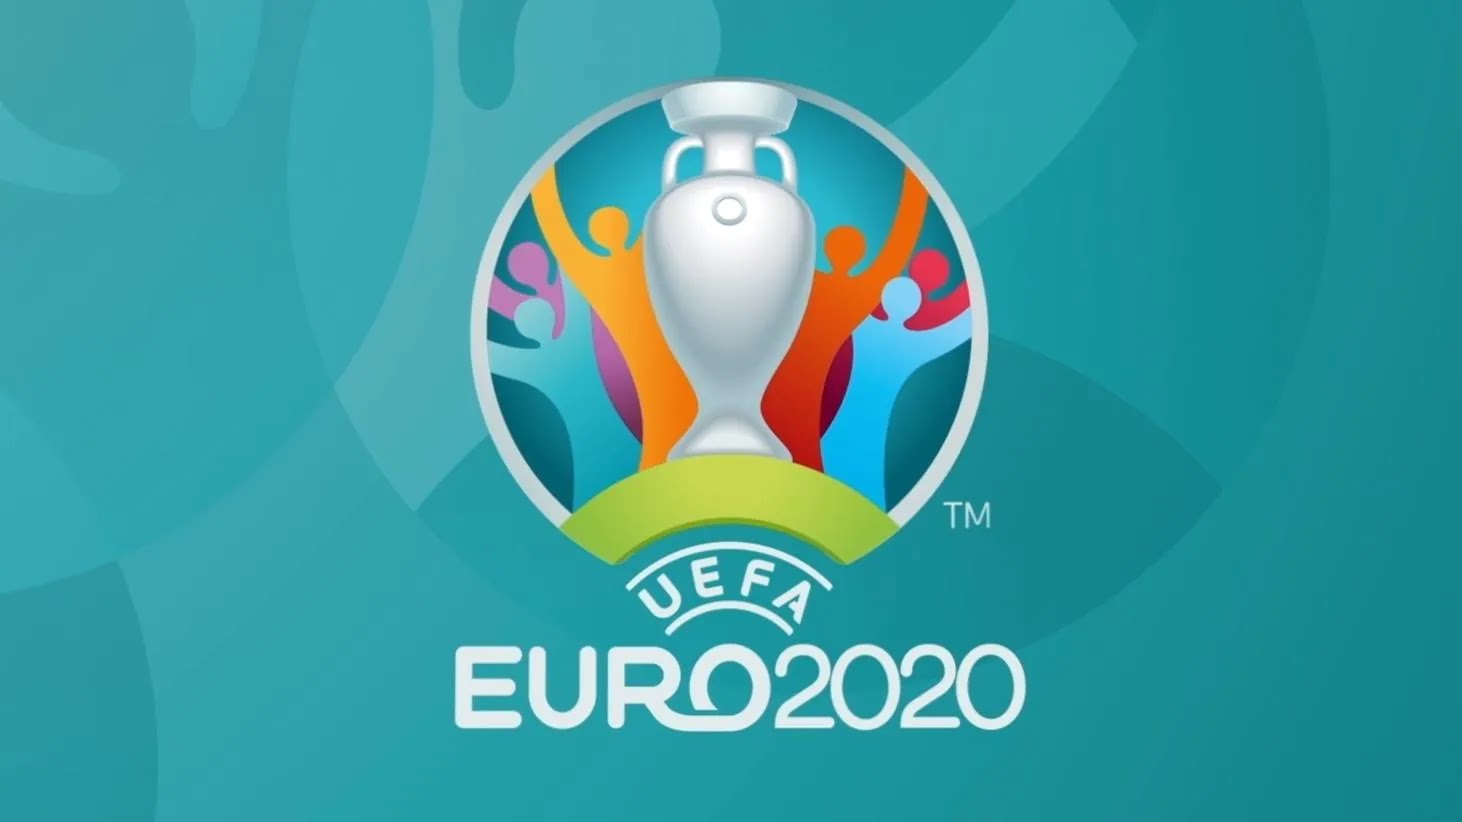 How to watch UEFA Euro 2020 from anywhere